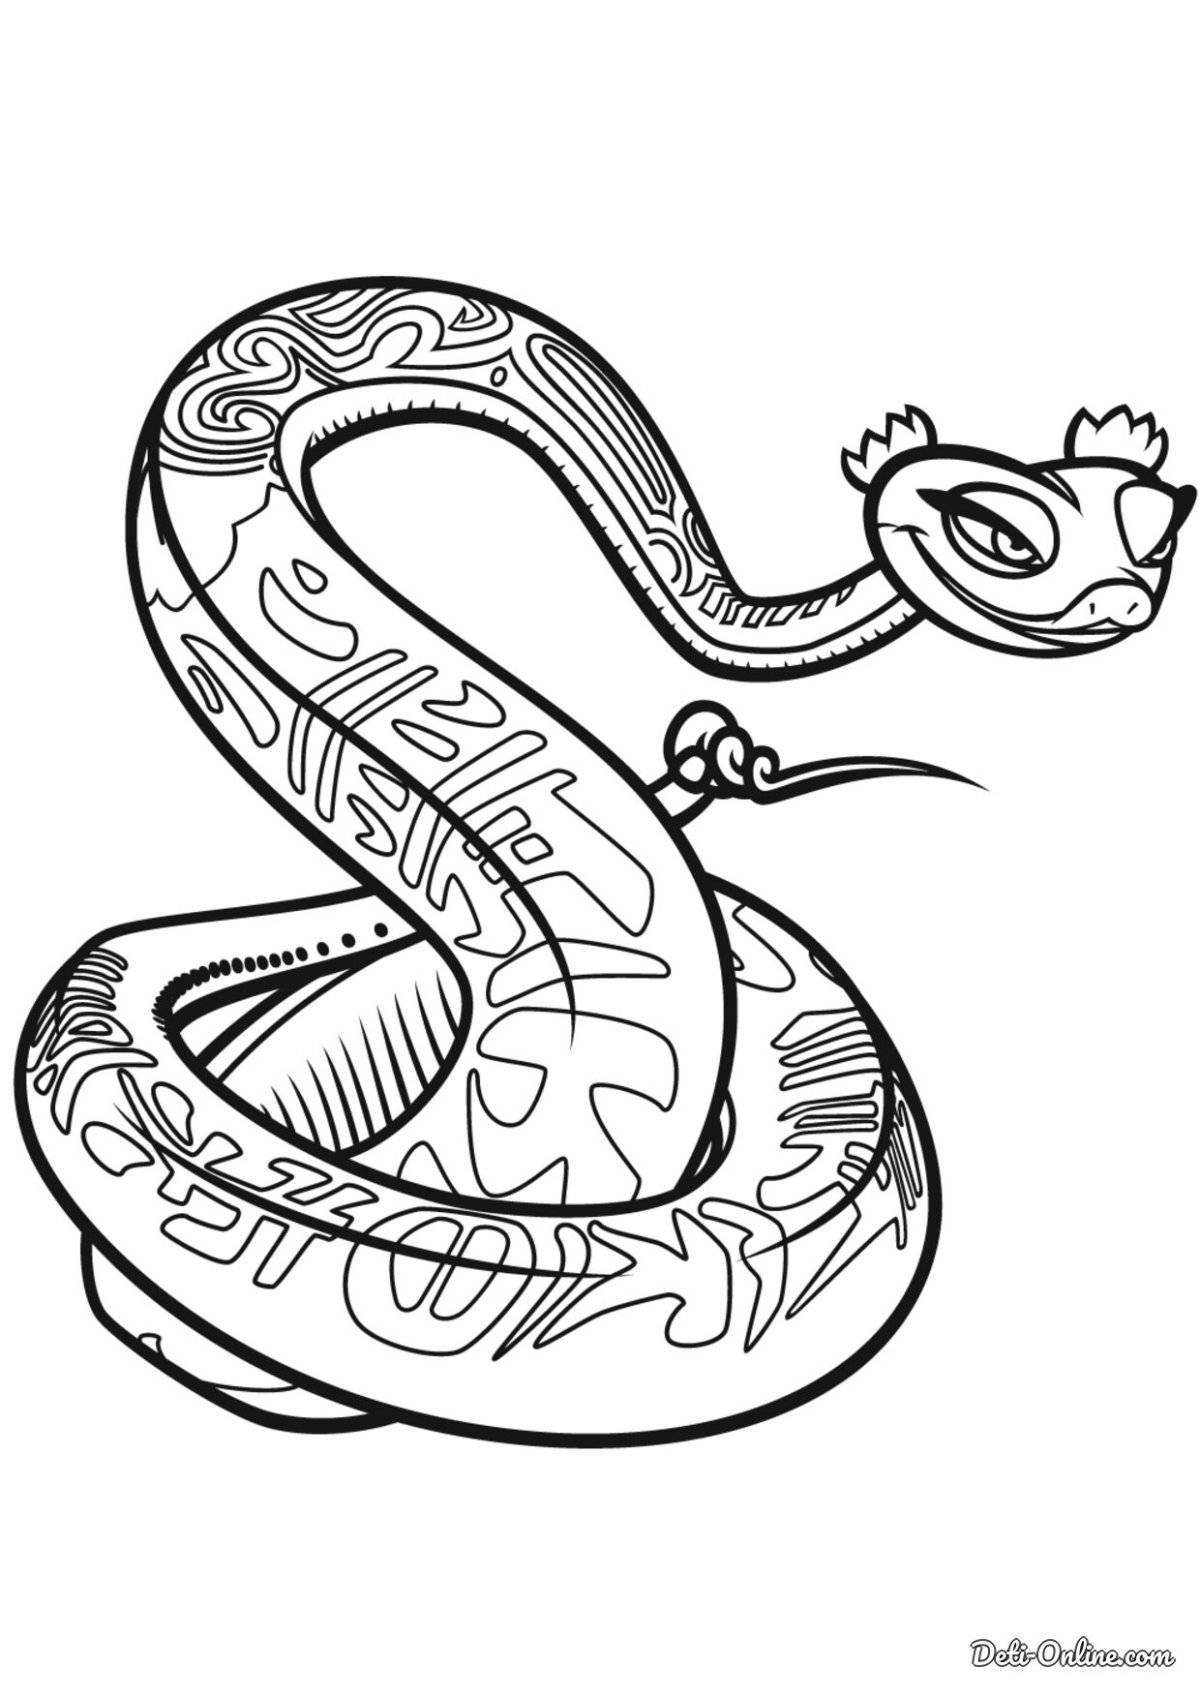 Gorgeous viper coloring page